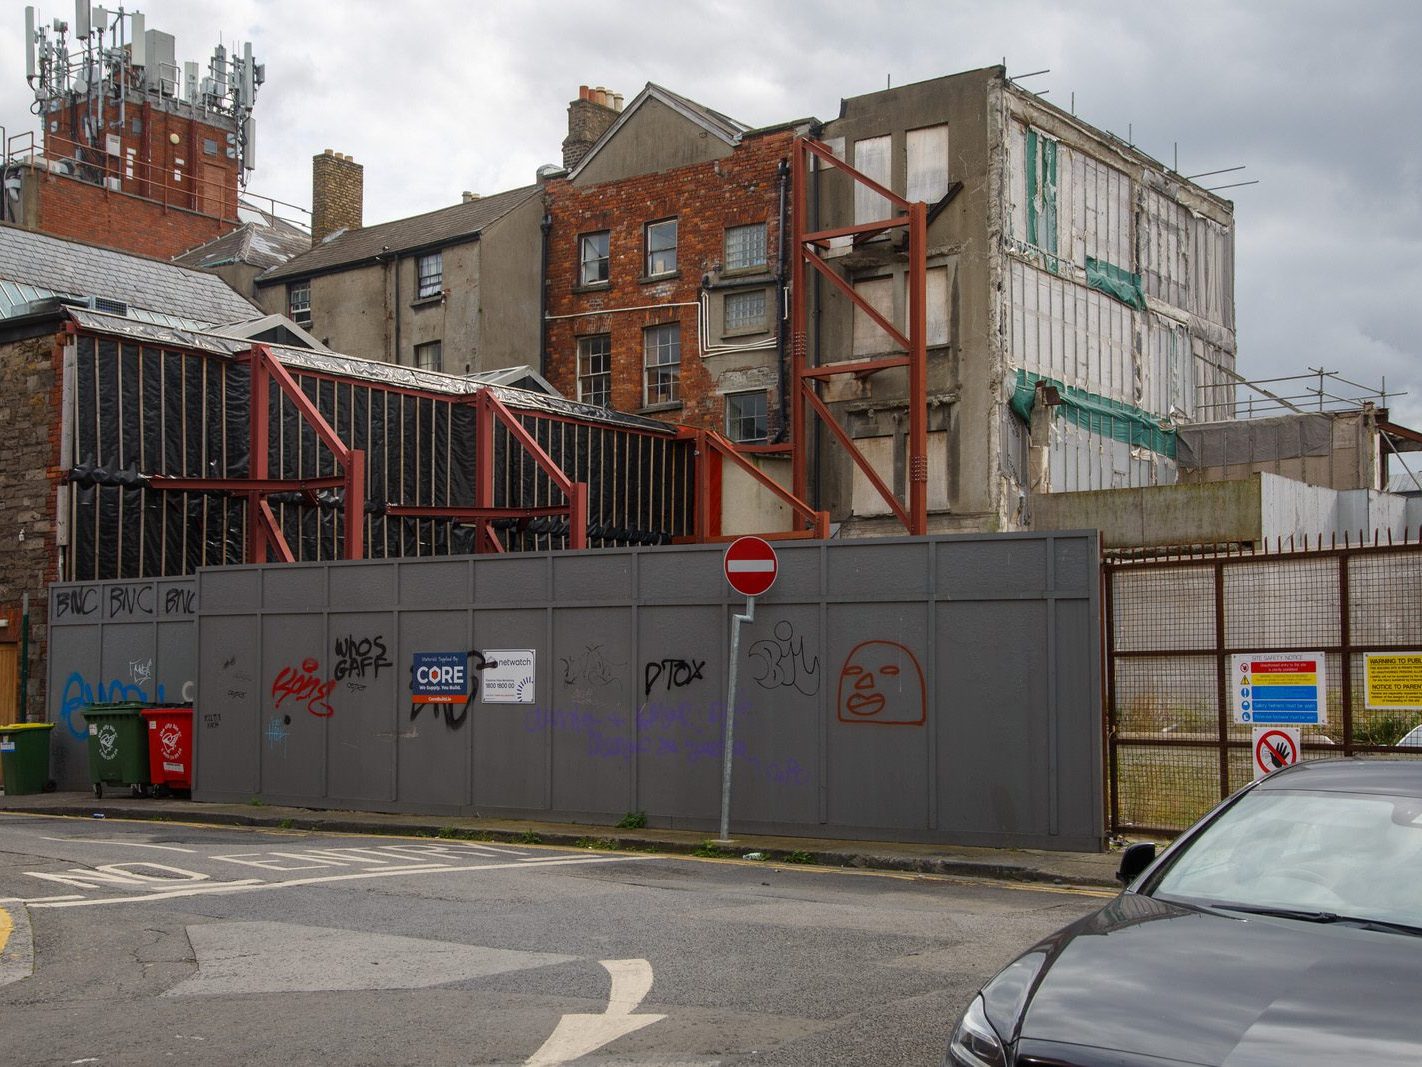 IF YOU VISIT LITTLE STRAND STREET [YOU WILL SEE A HUGE VOID WHERE THE ORMOND HOTEL ONCE WAS] 017